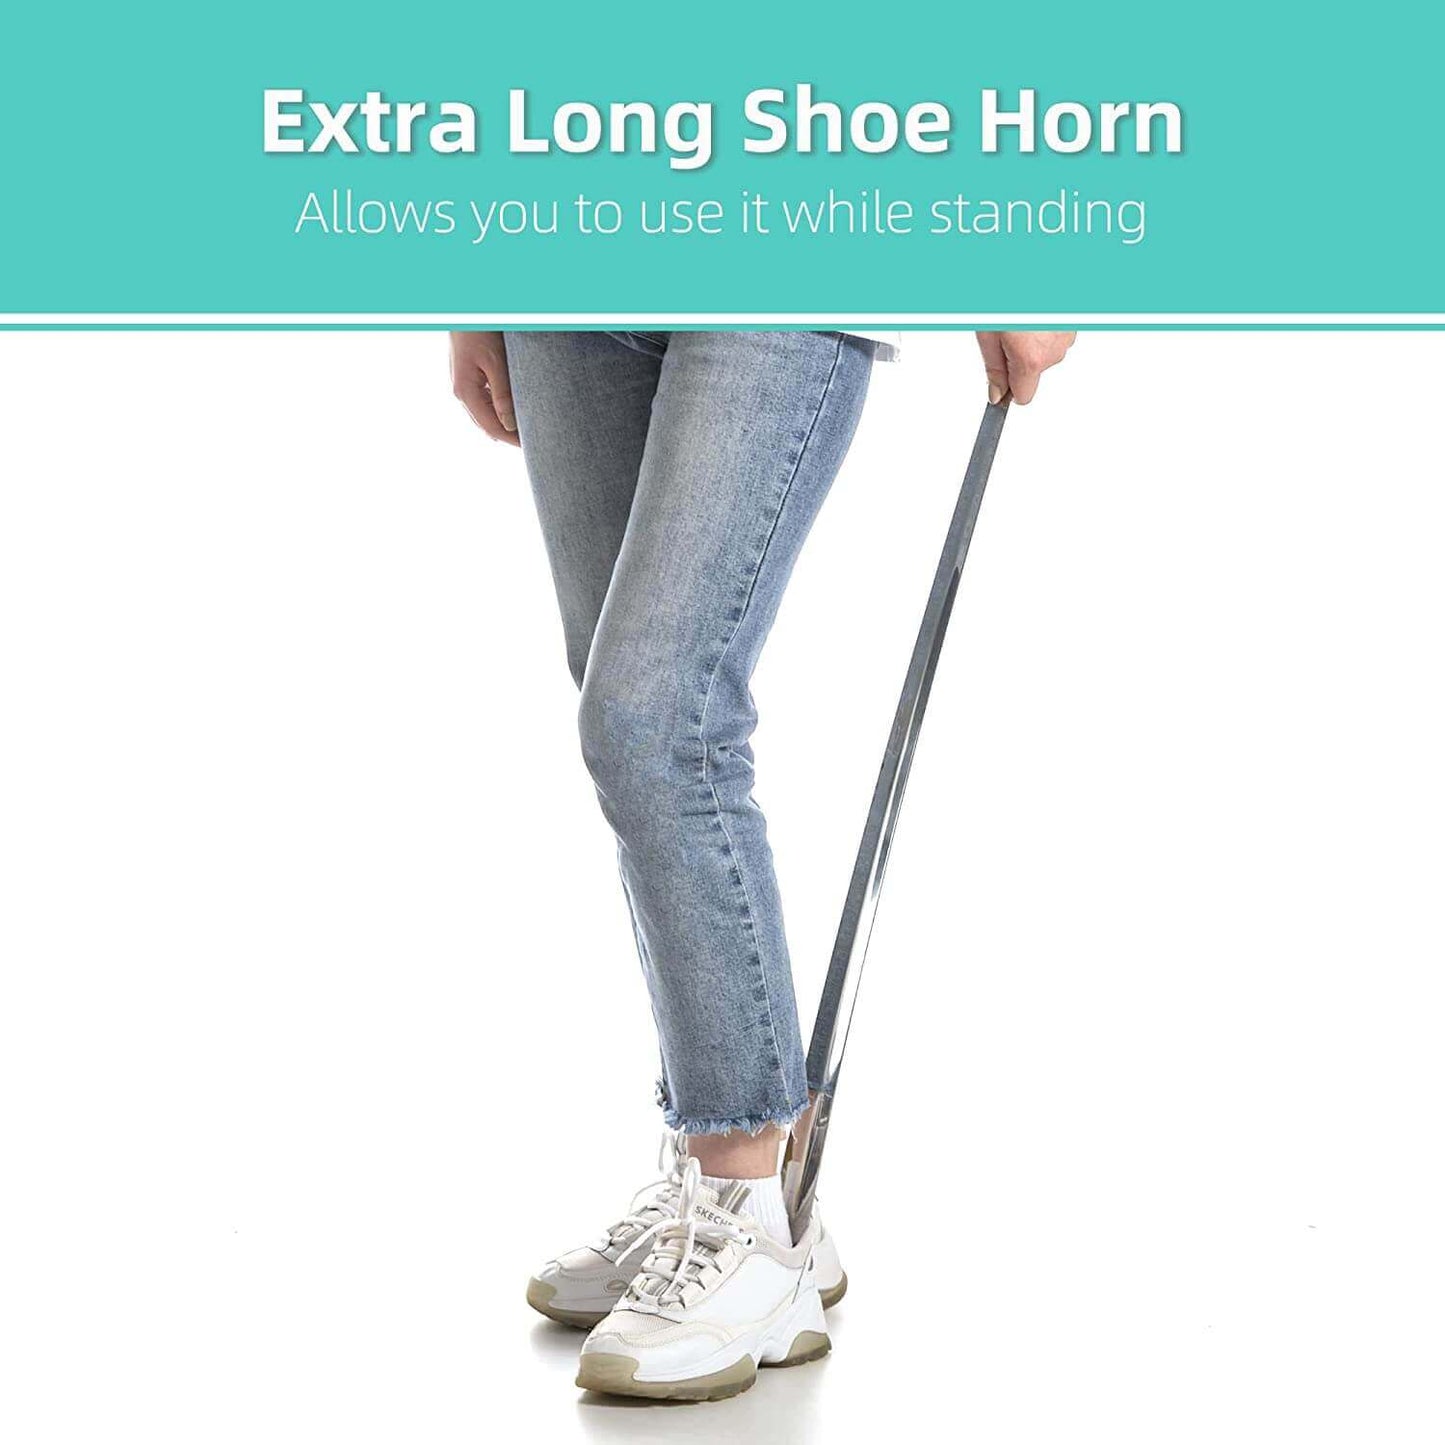 31.5'' inch extra long handled shoe horn for elderly, seniors or disabled person by Fanwer, feature image